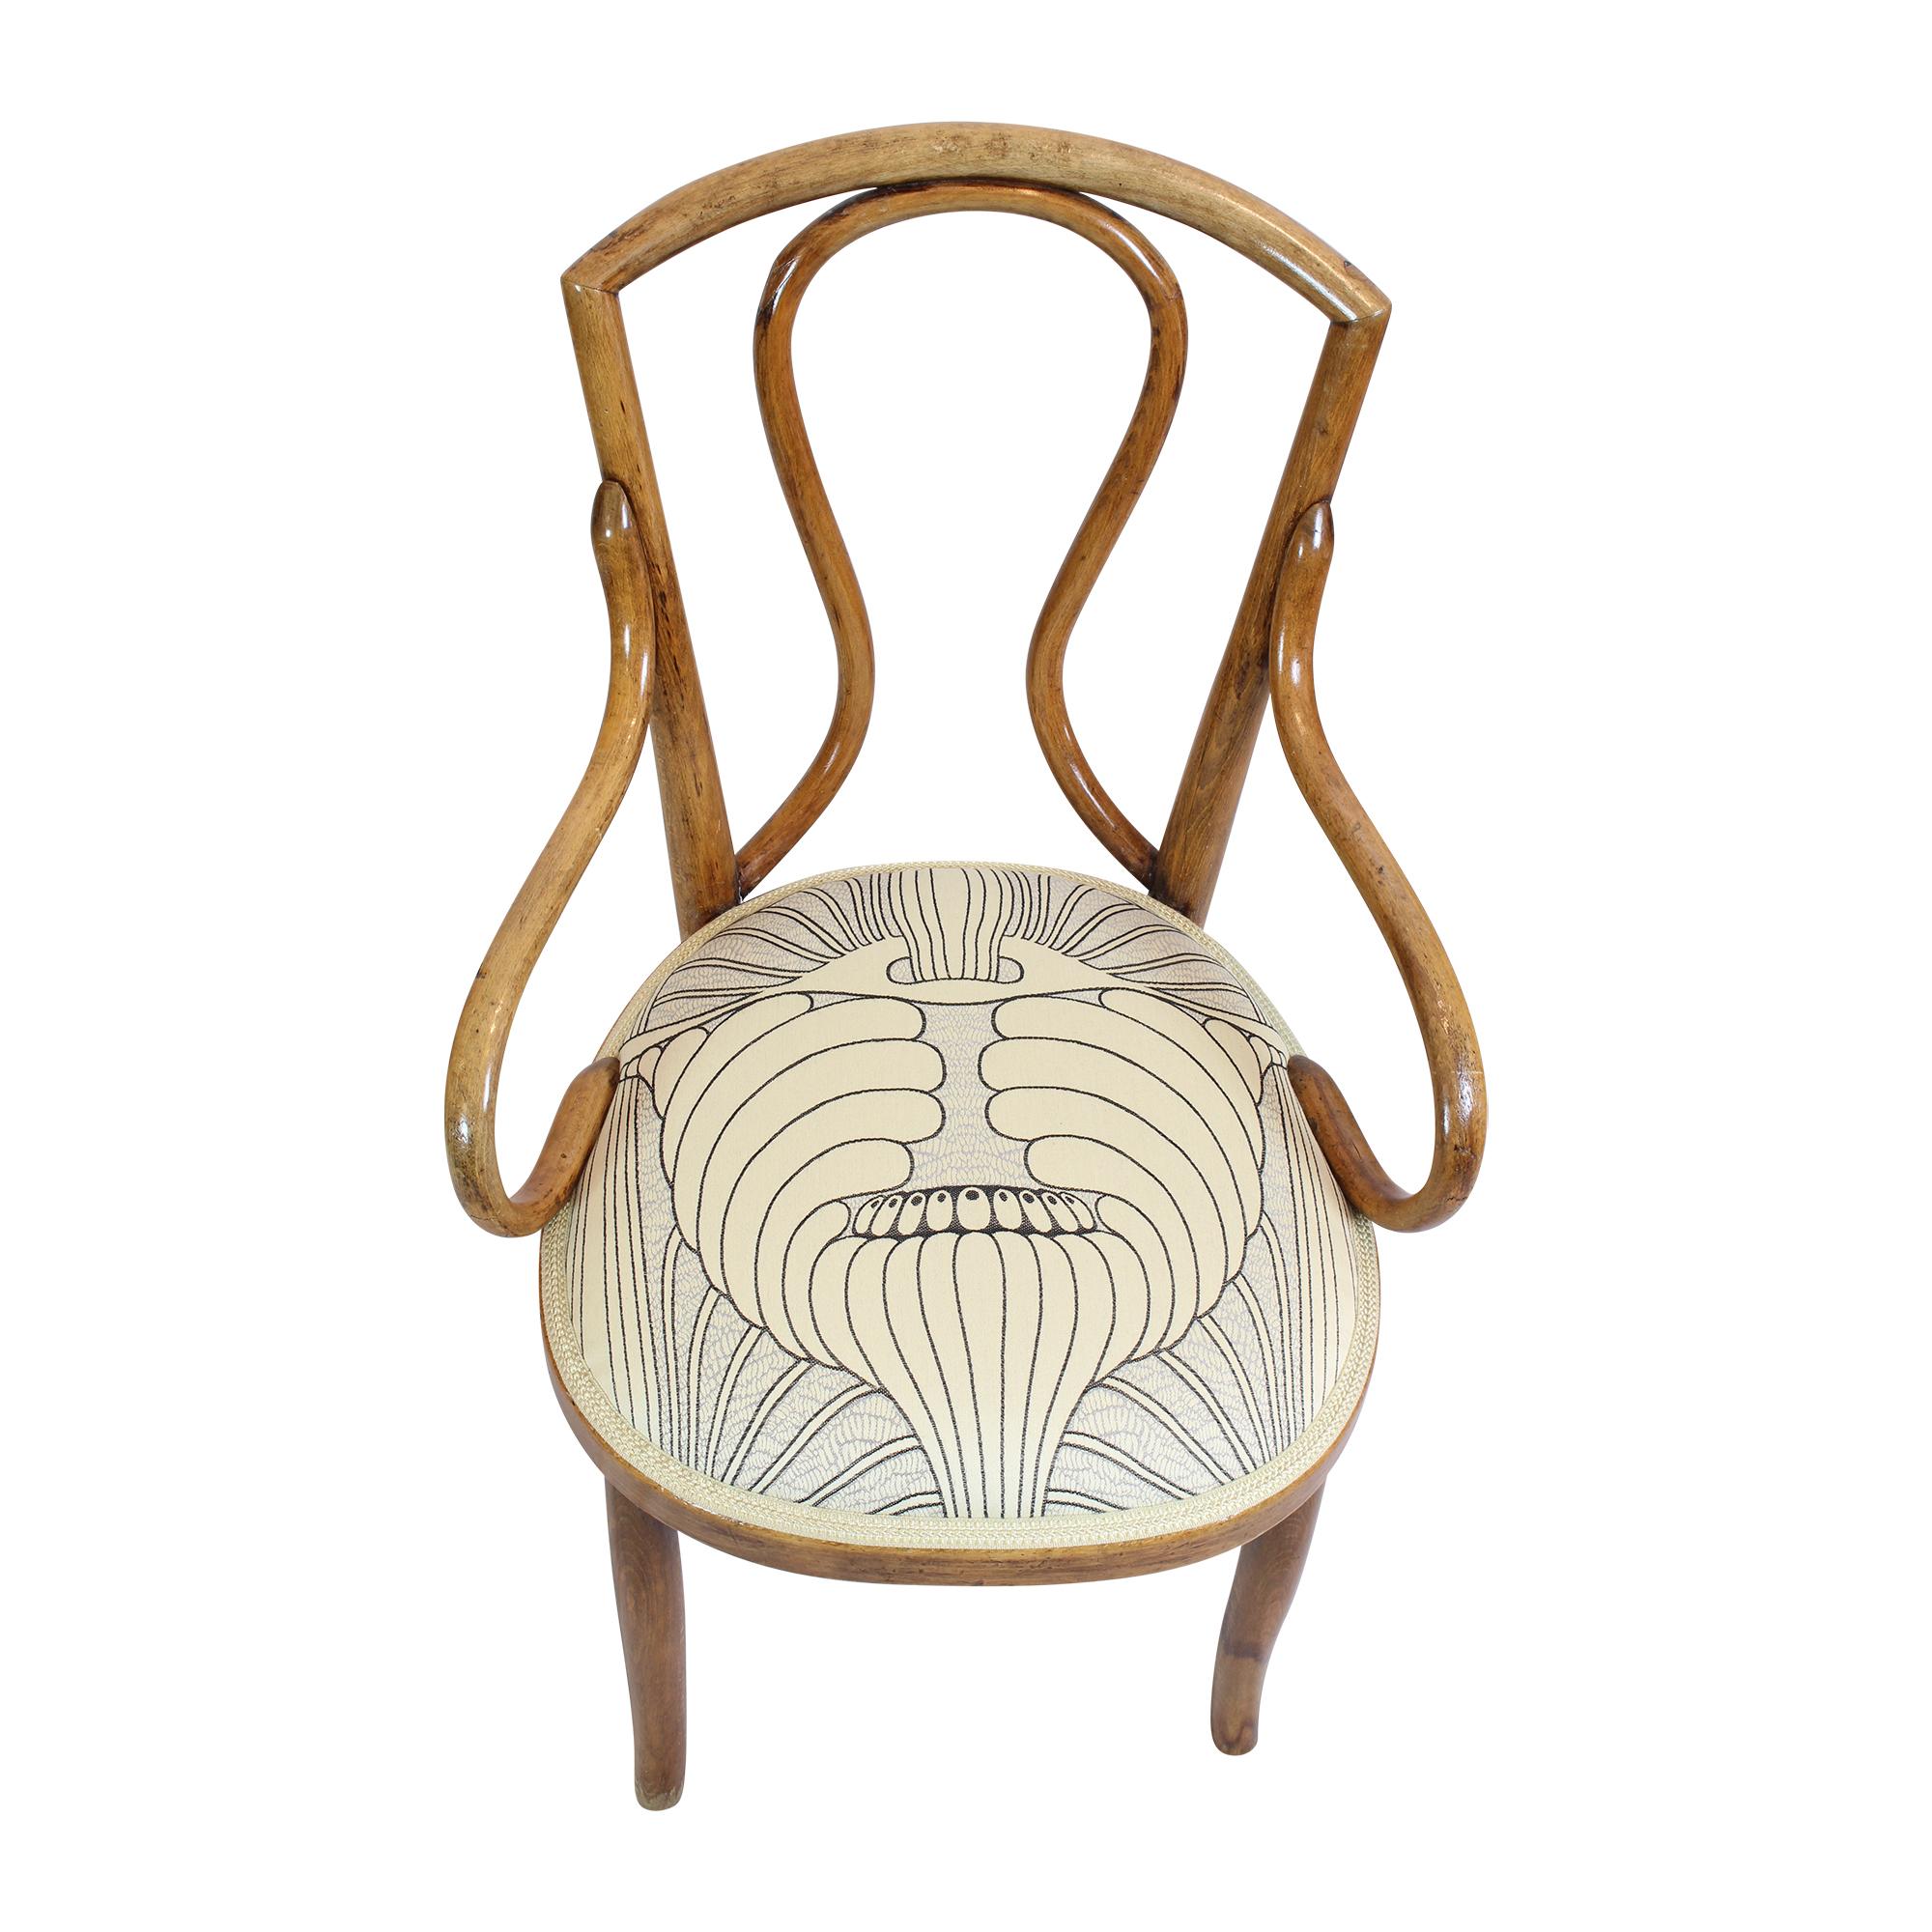 Early 20th Century Art Nouveau Around 1900 Bentwood Armchair For Sale